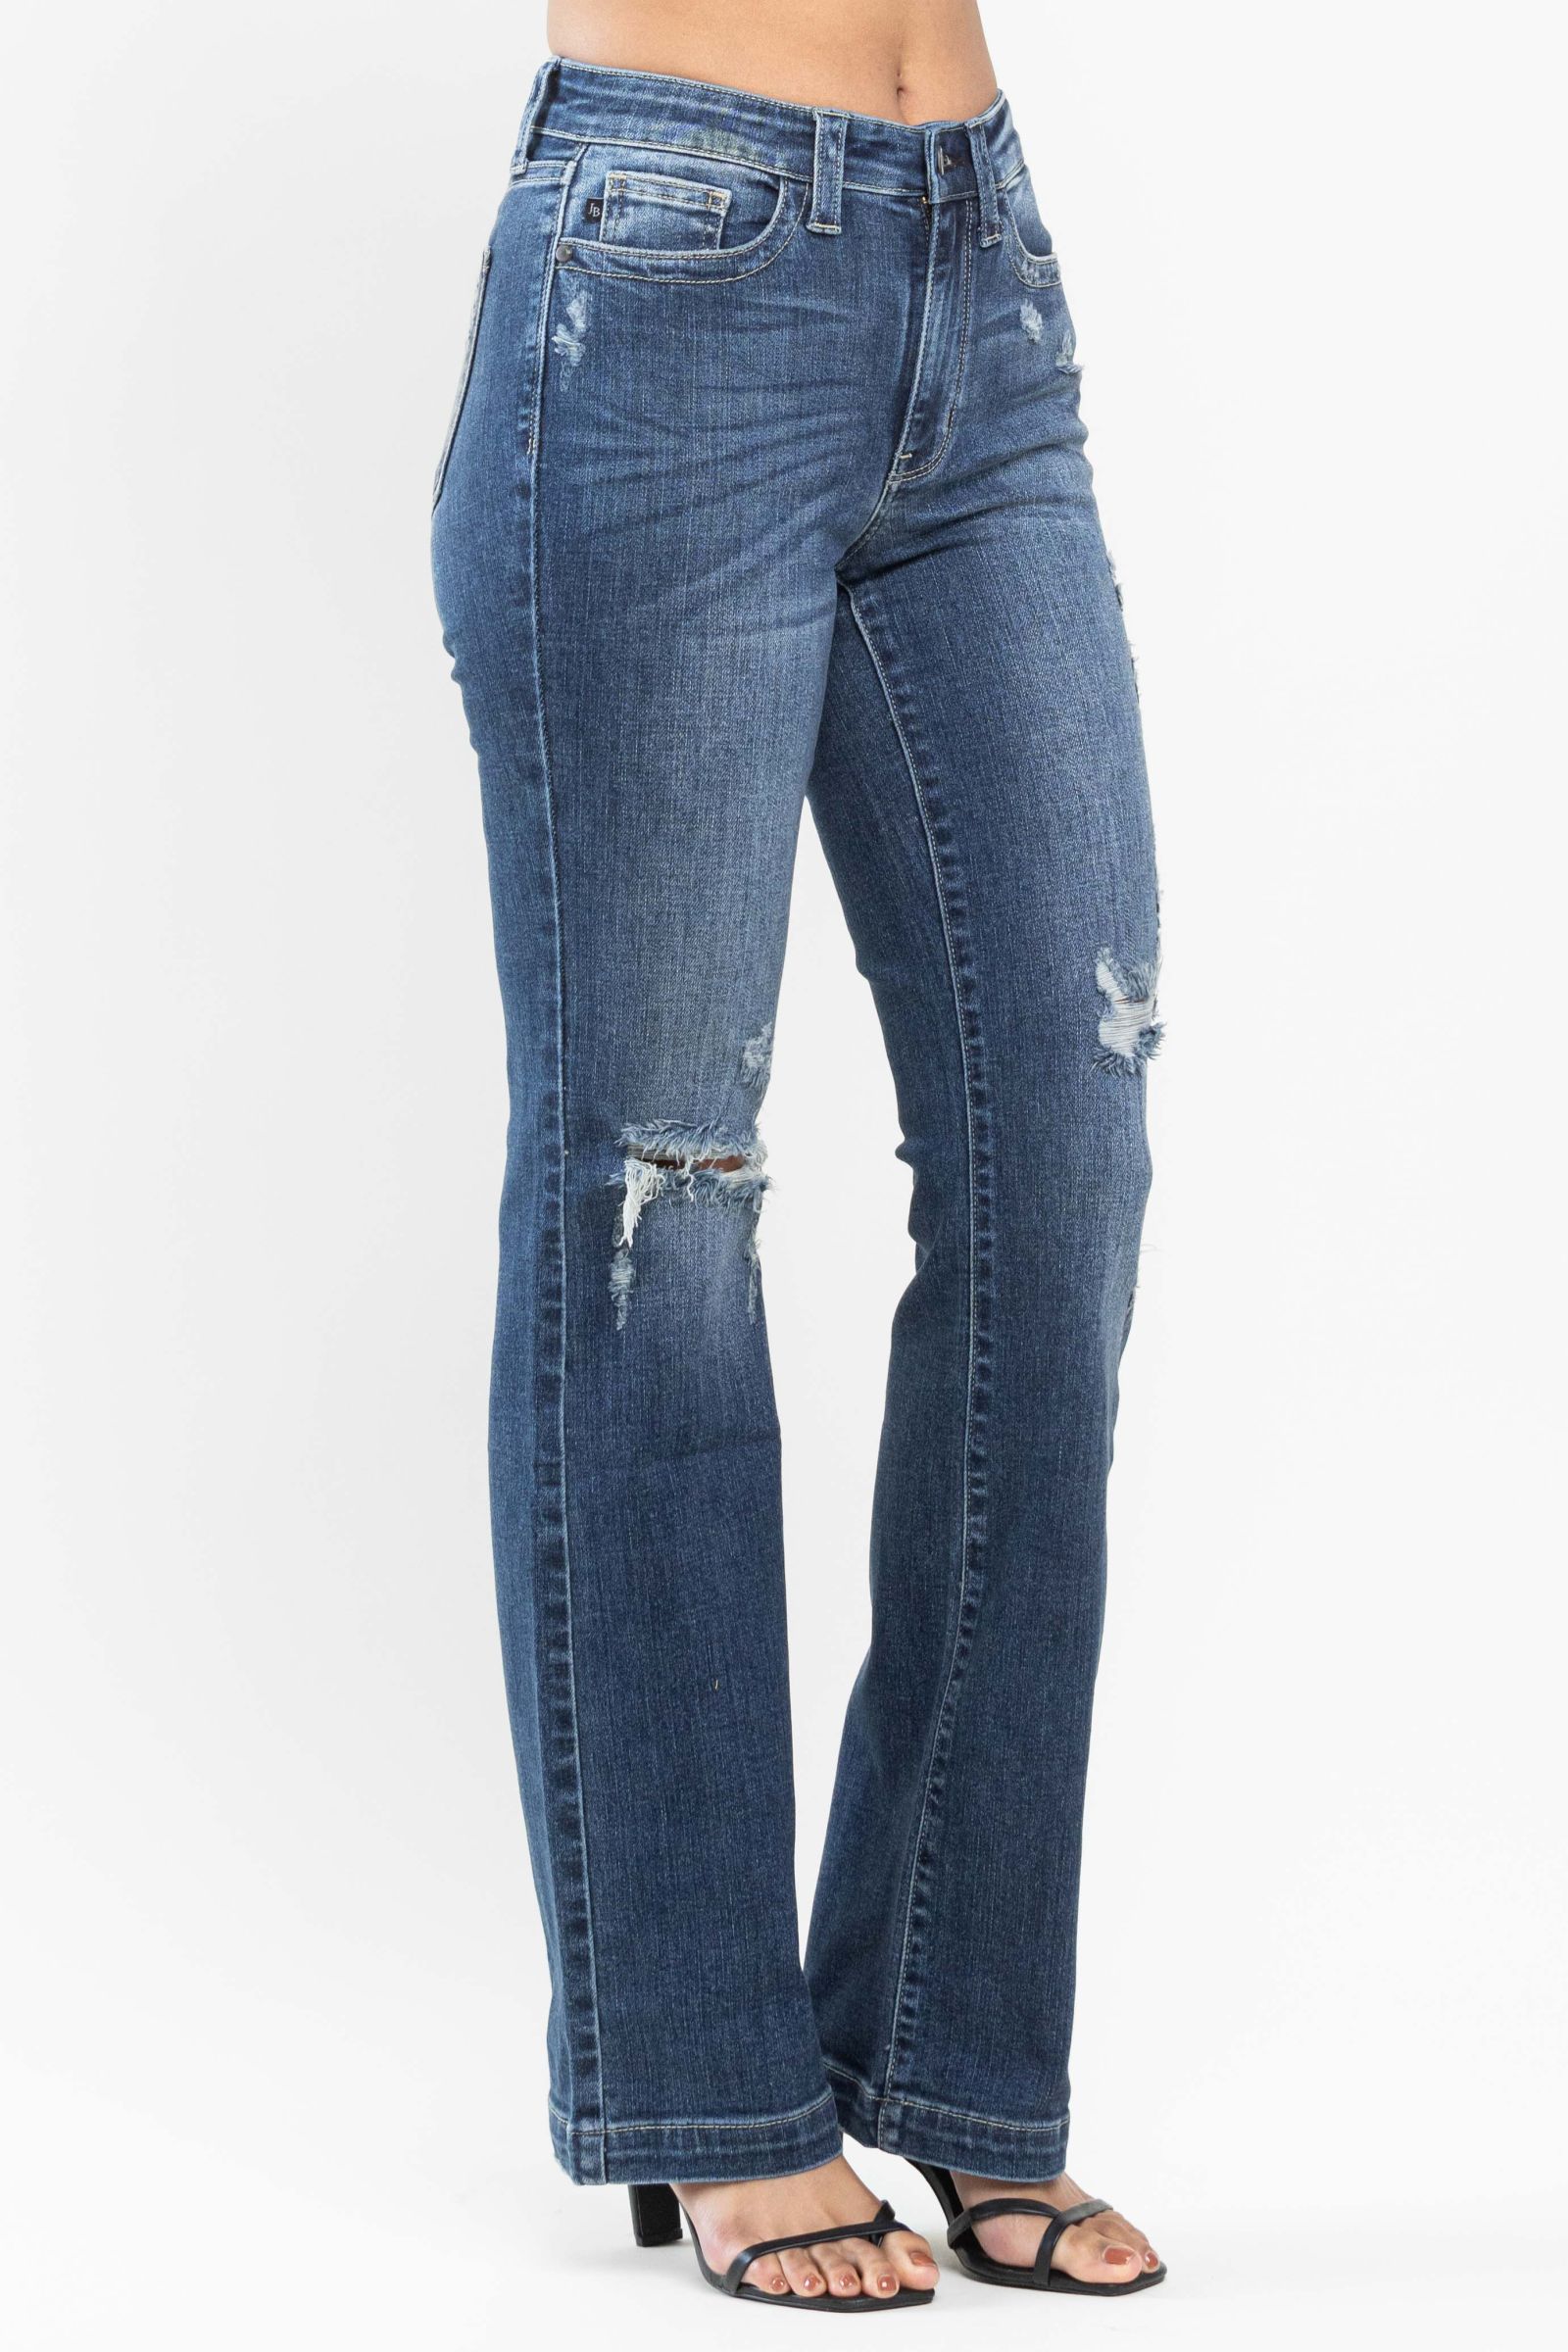 Judy Blue Mid Rise Destroyed Dark Bootcut Jeans